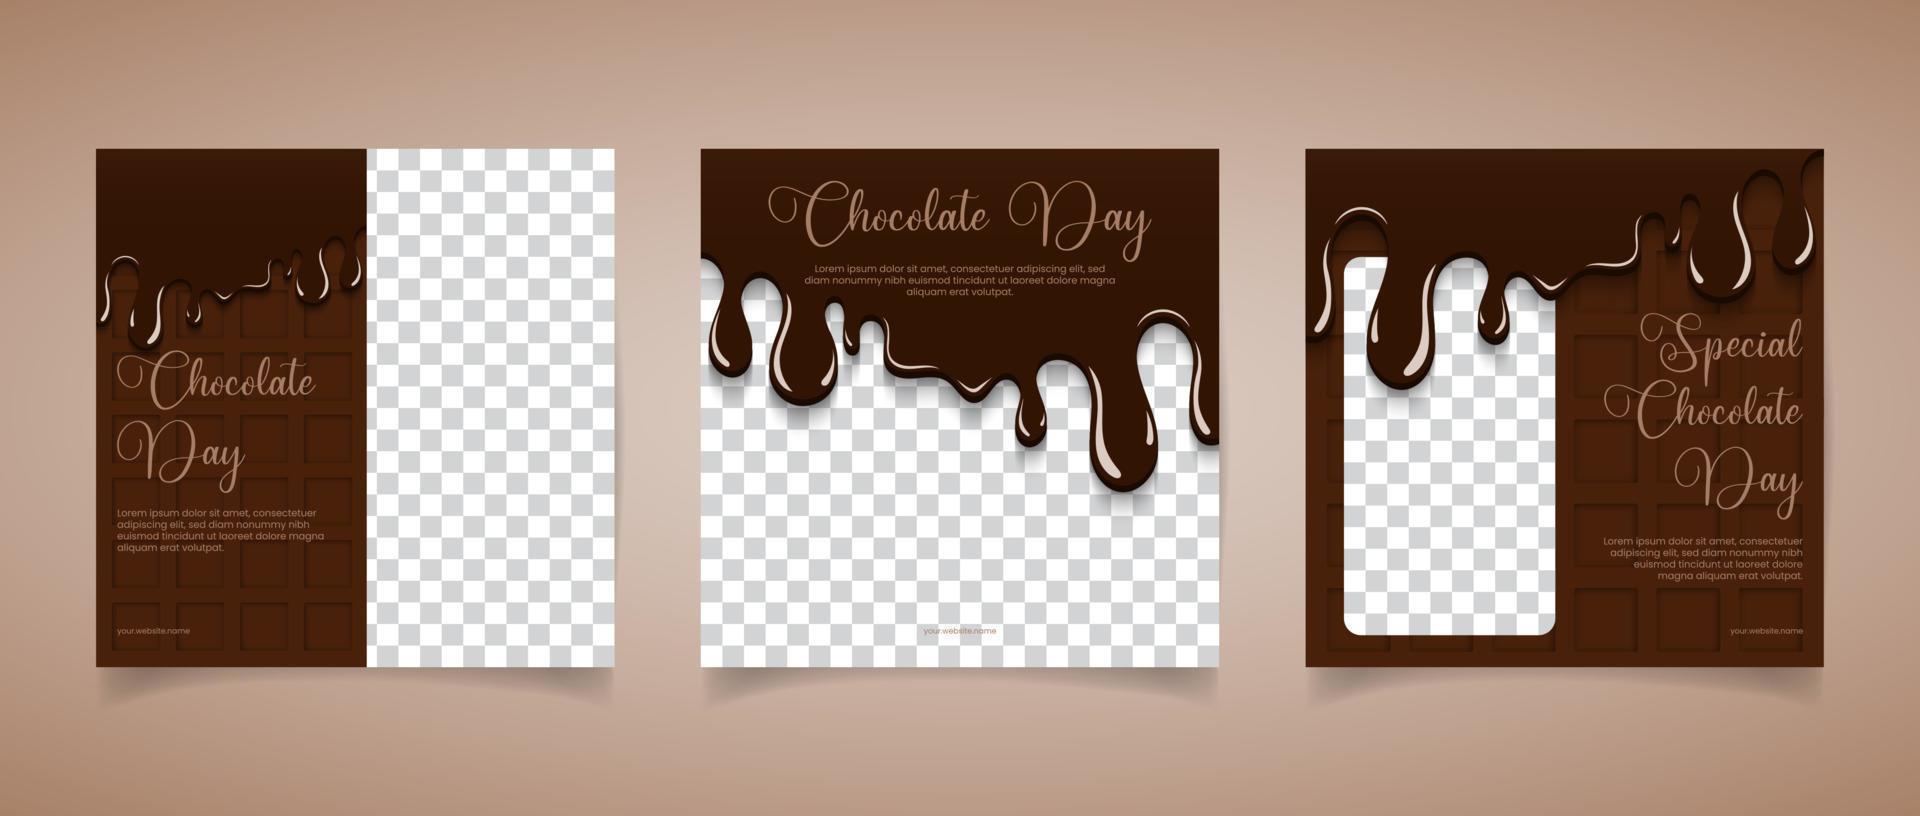 social media template for world chocolate day suitable for web ads, greeting cards and social media banners vector